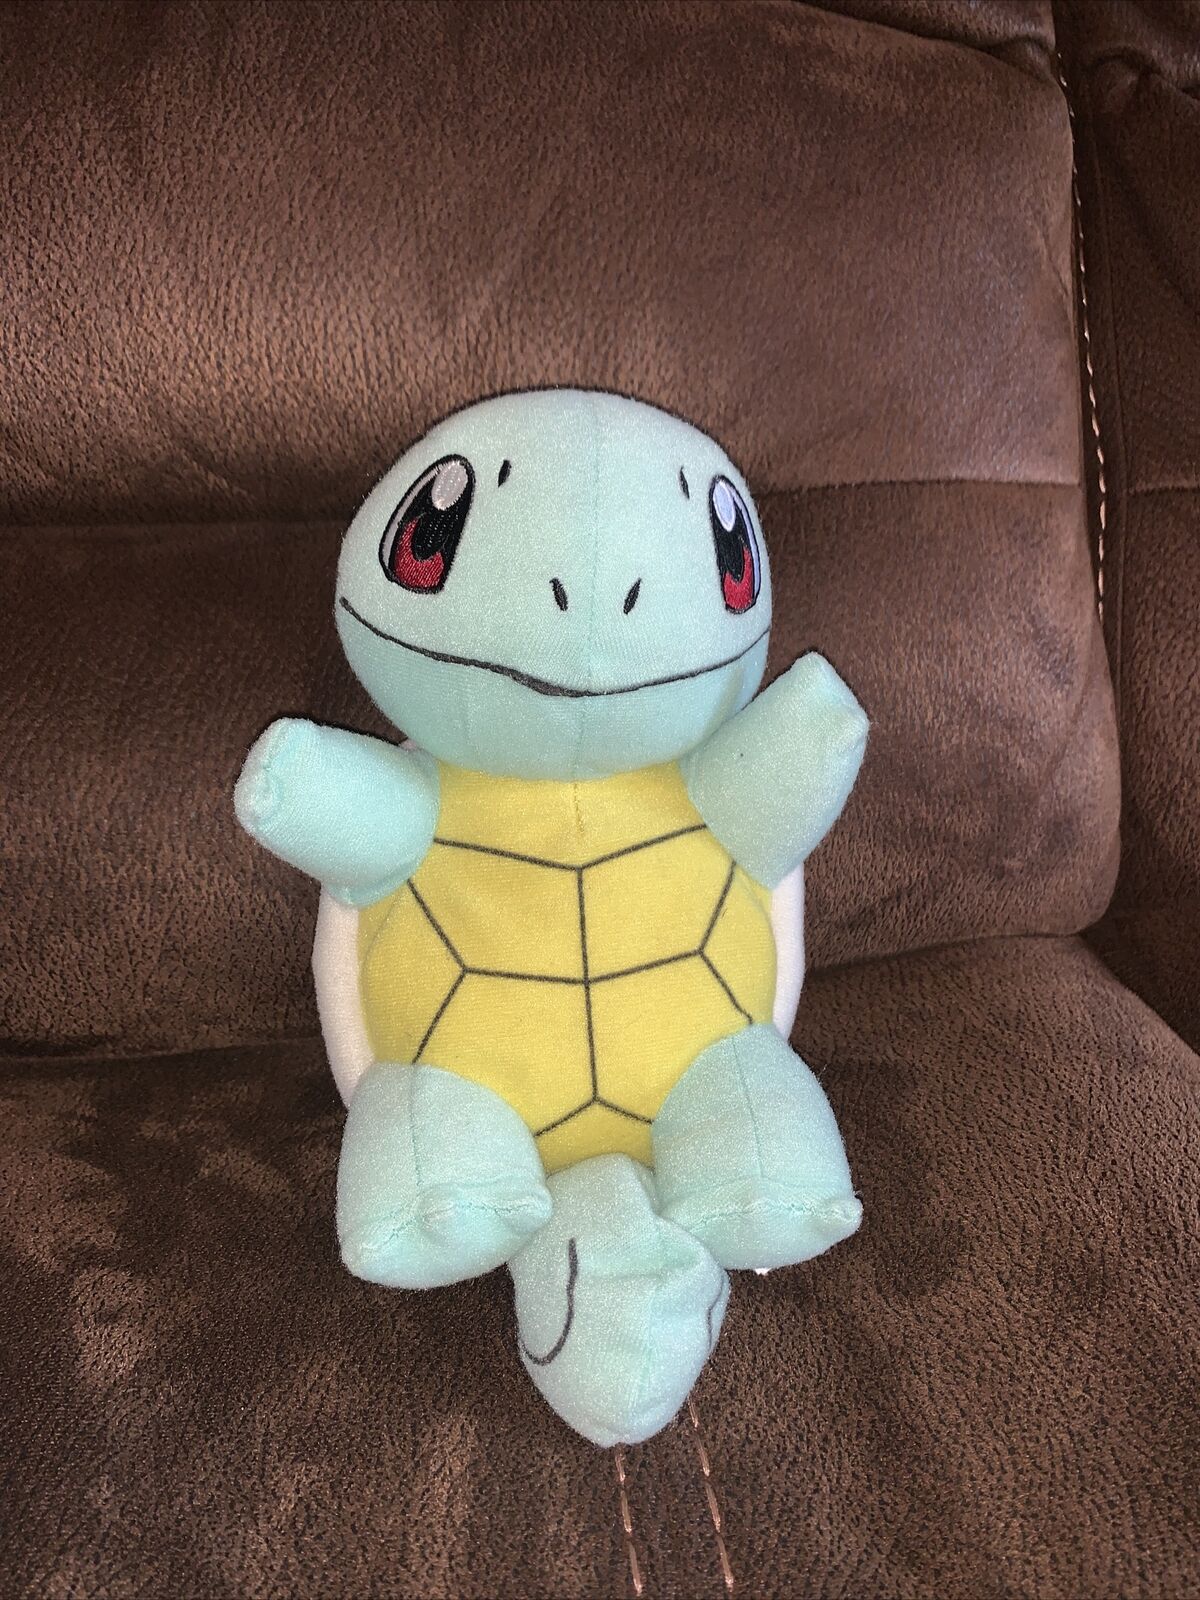 9” Squirtle Plush, 2016 Toy Factory Edition, Pokemon Merchandise